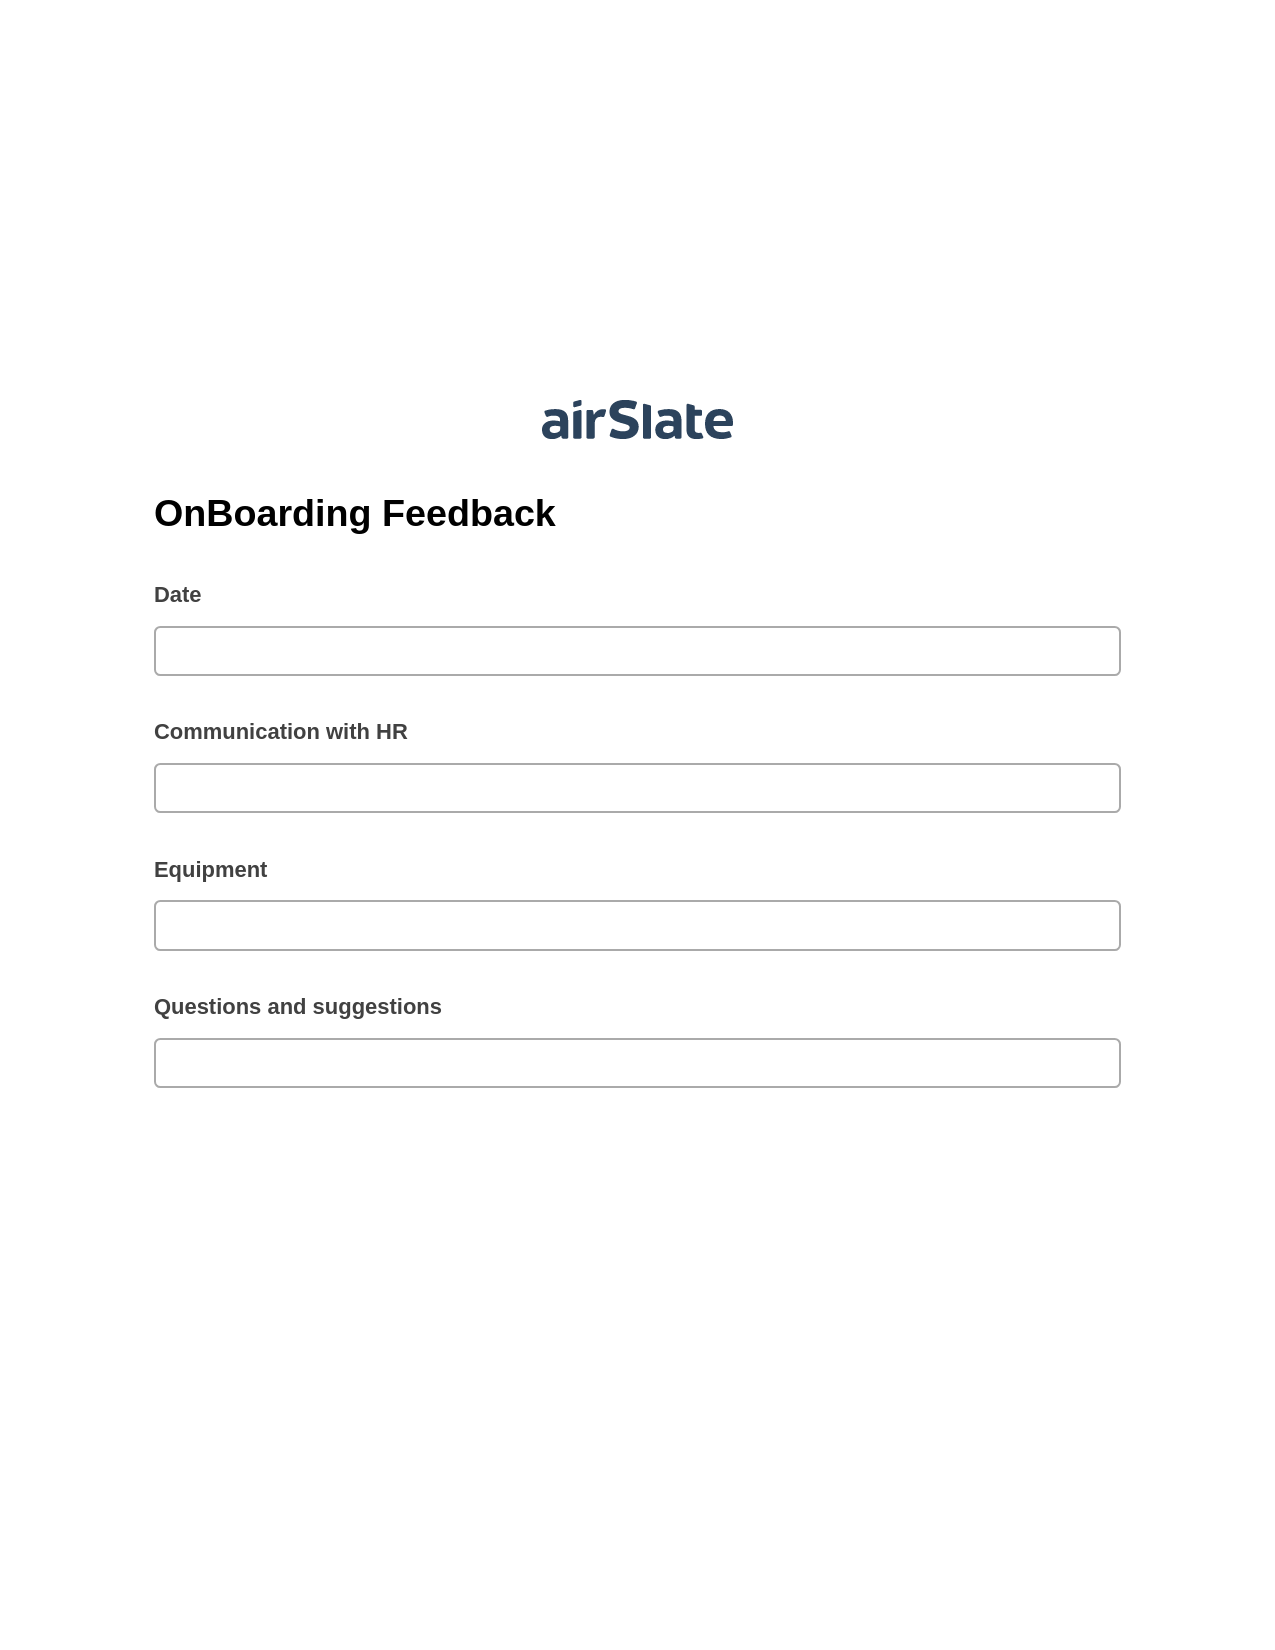 Multirole OnBoarding Feedback Pre-fill Slate from MS Dynamics 365 Records Bot, Google Sheet Two-Way Binding Bot, Archive to SharePoint Folder Bot